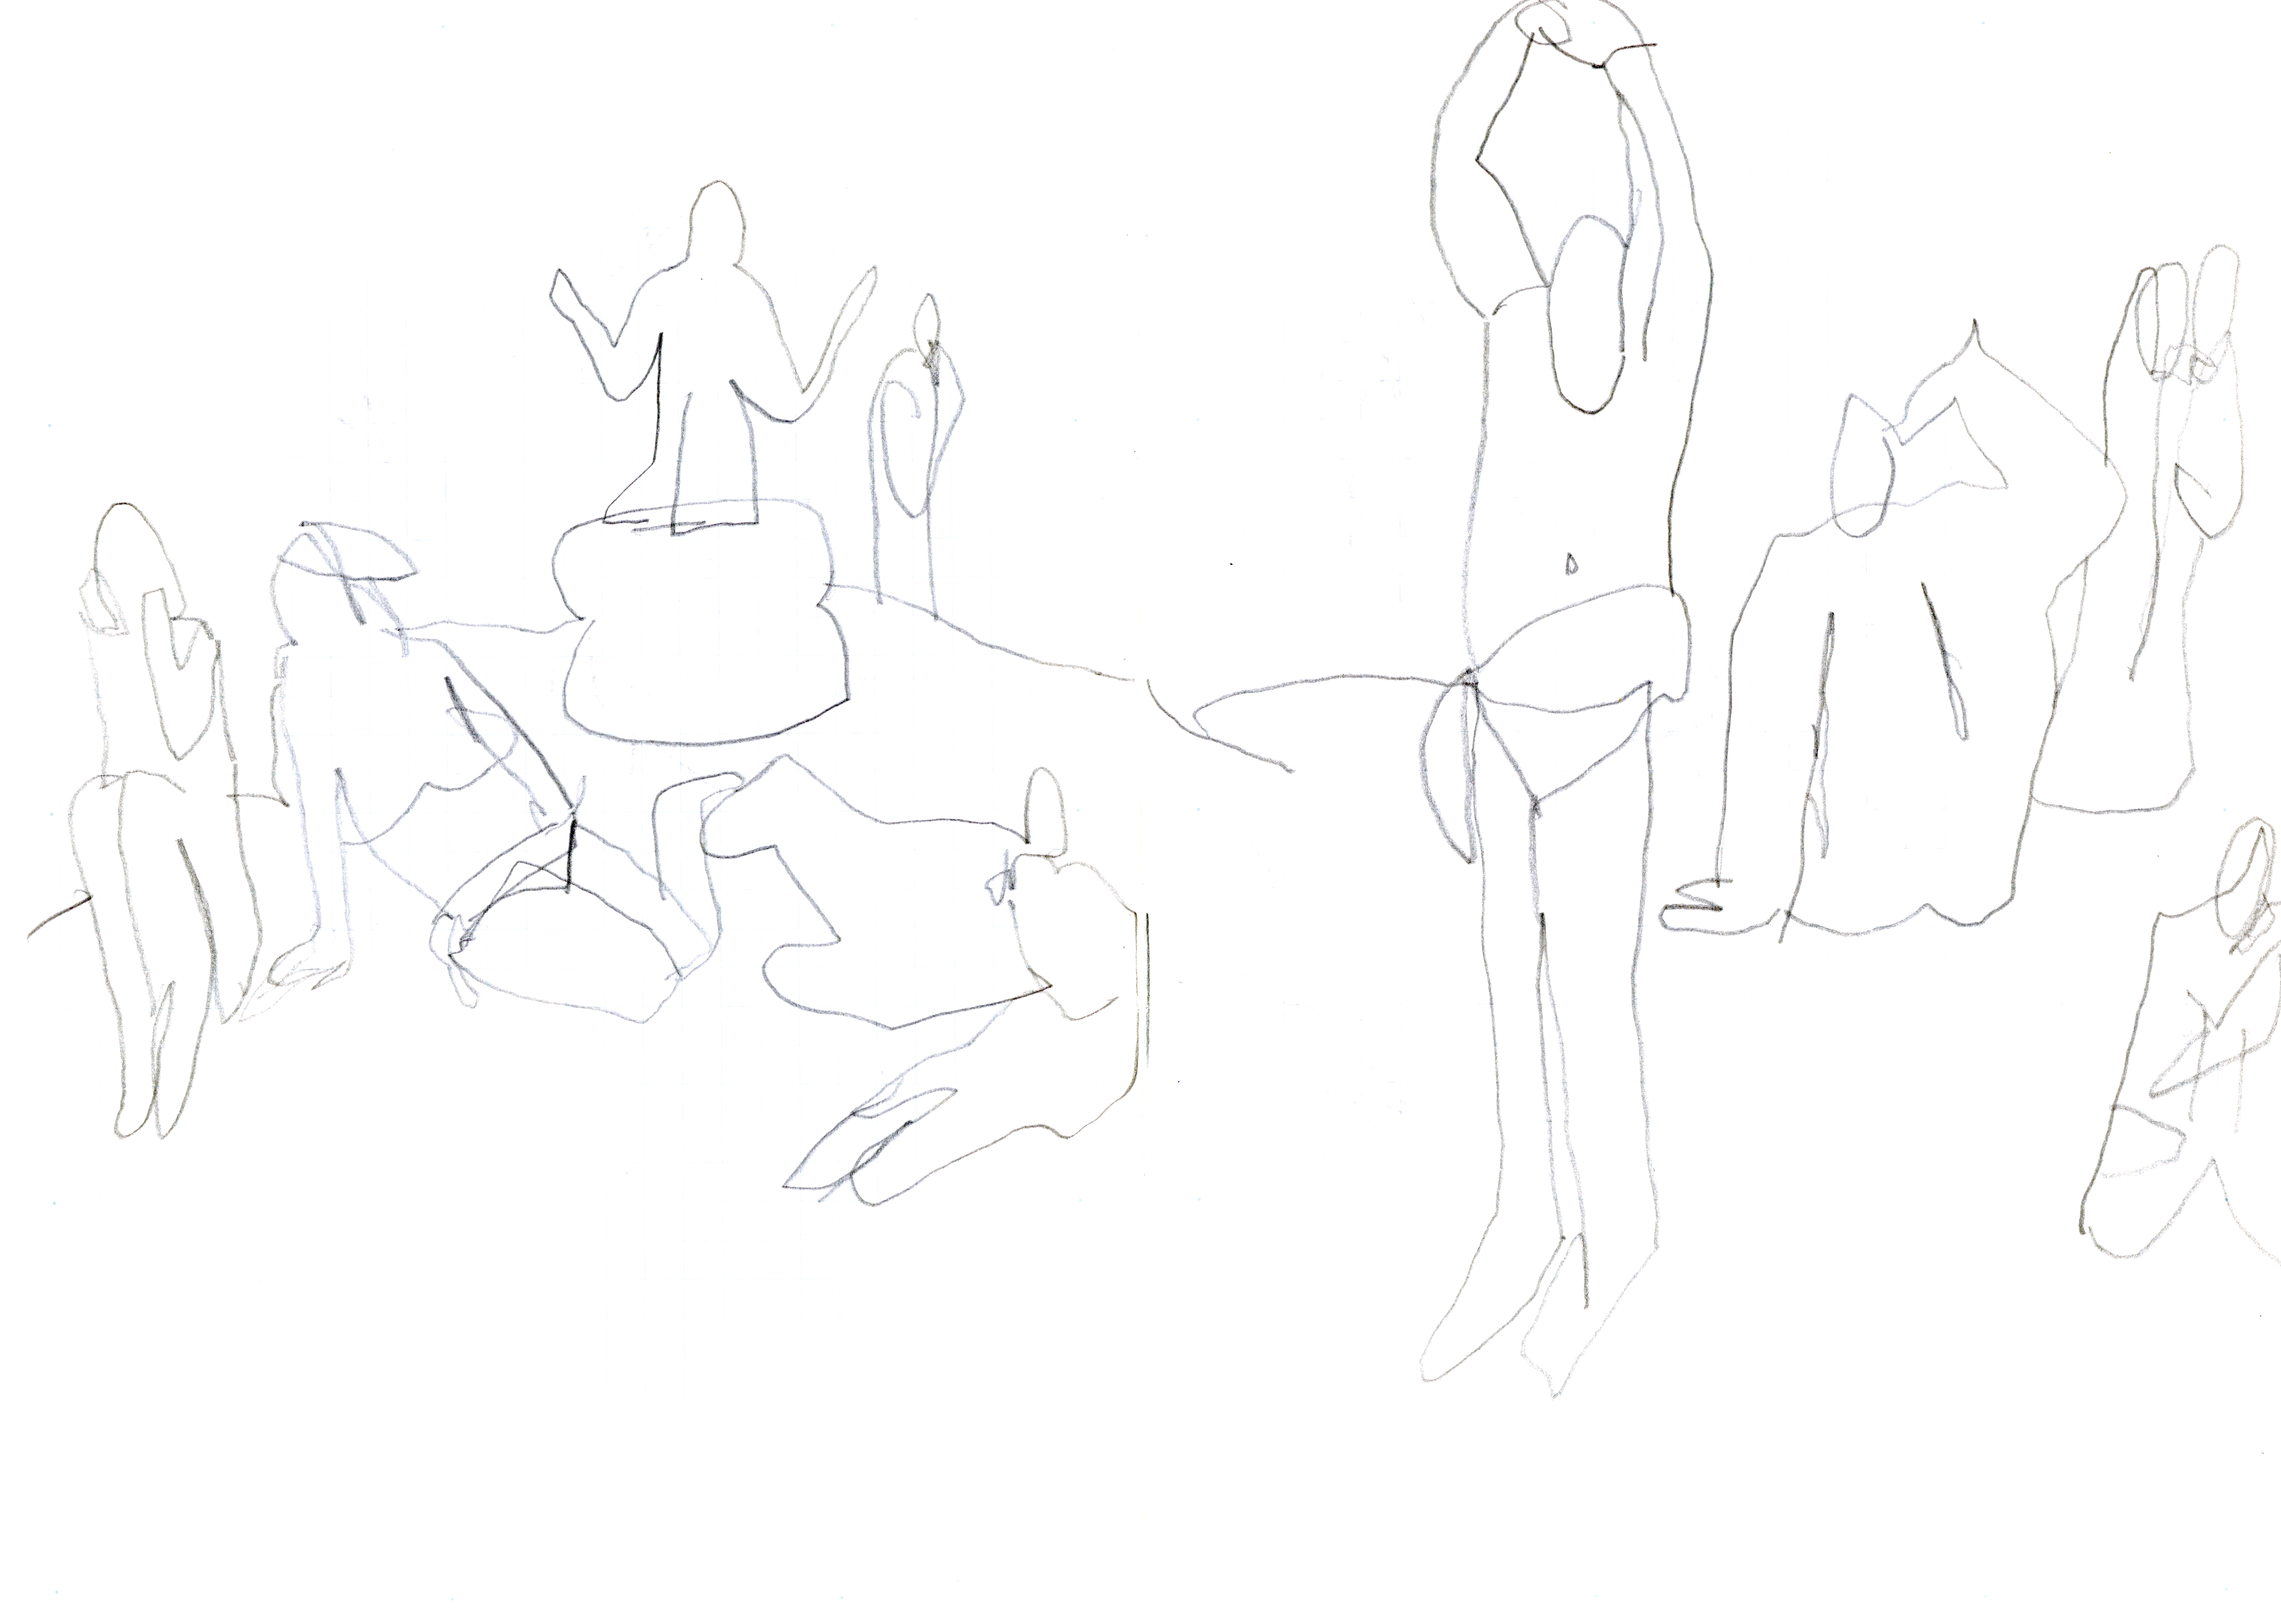 pencil drawing of figures across a horizontal landscape, some standing some sitting